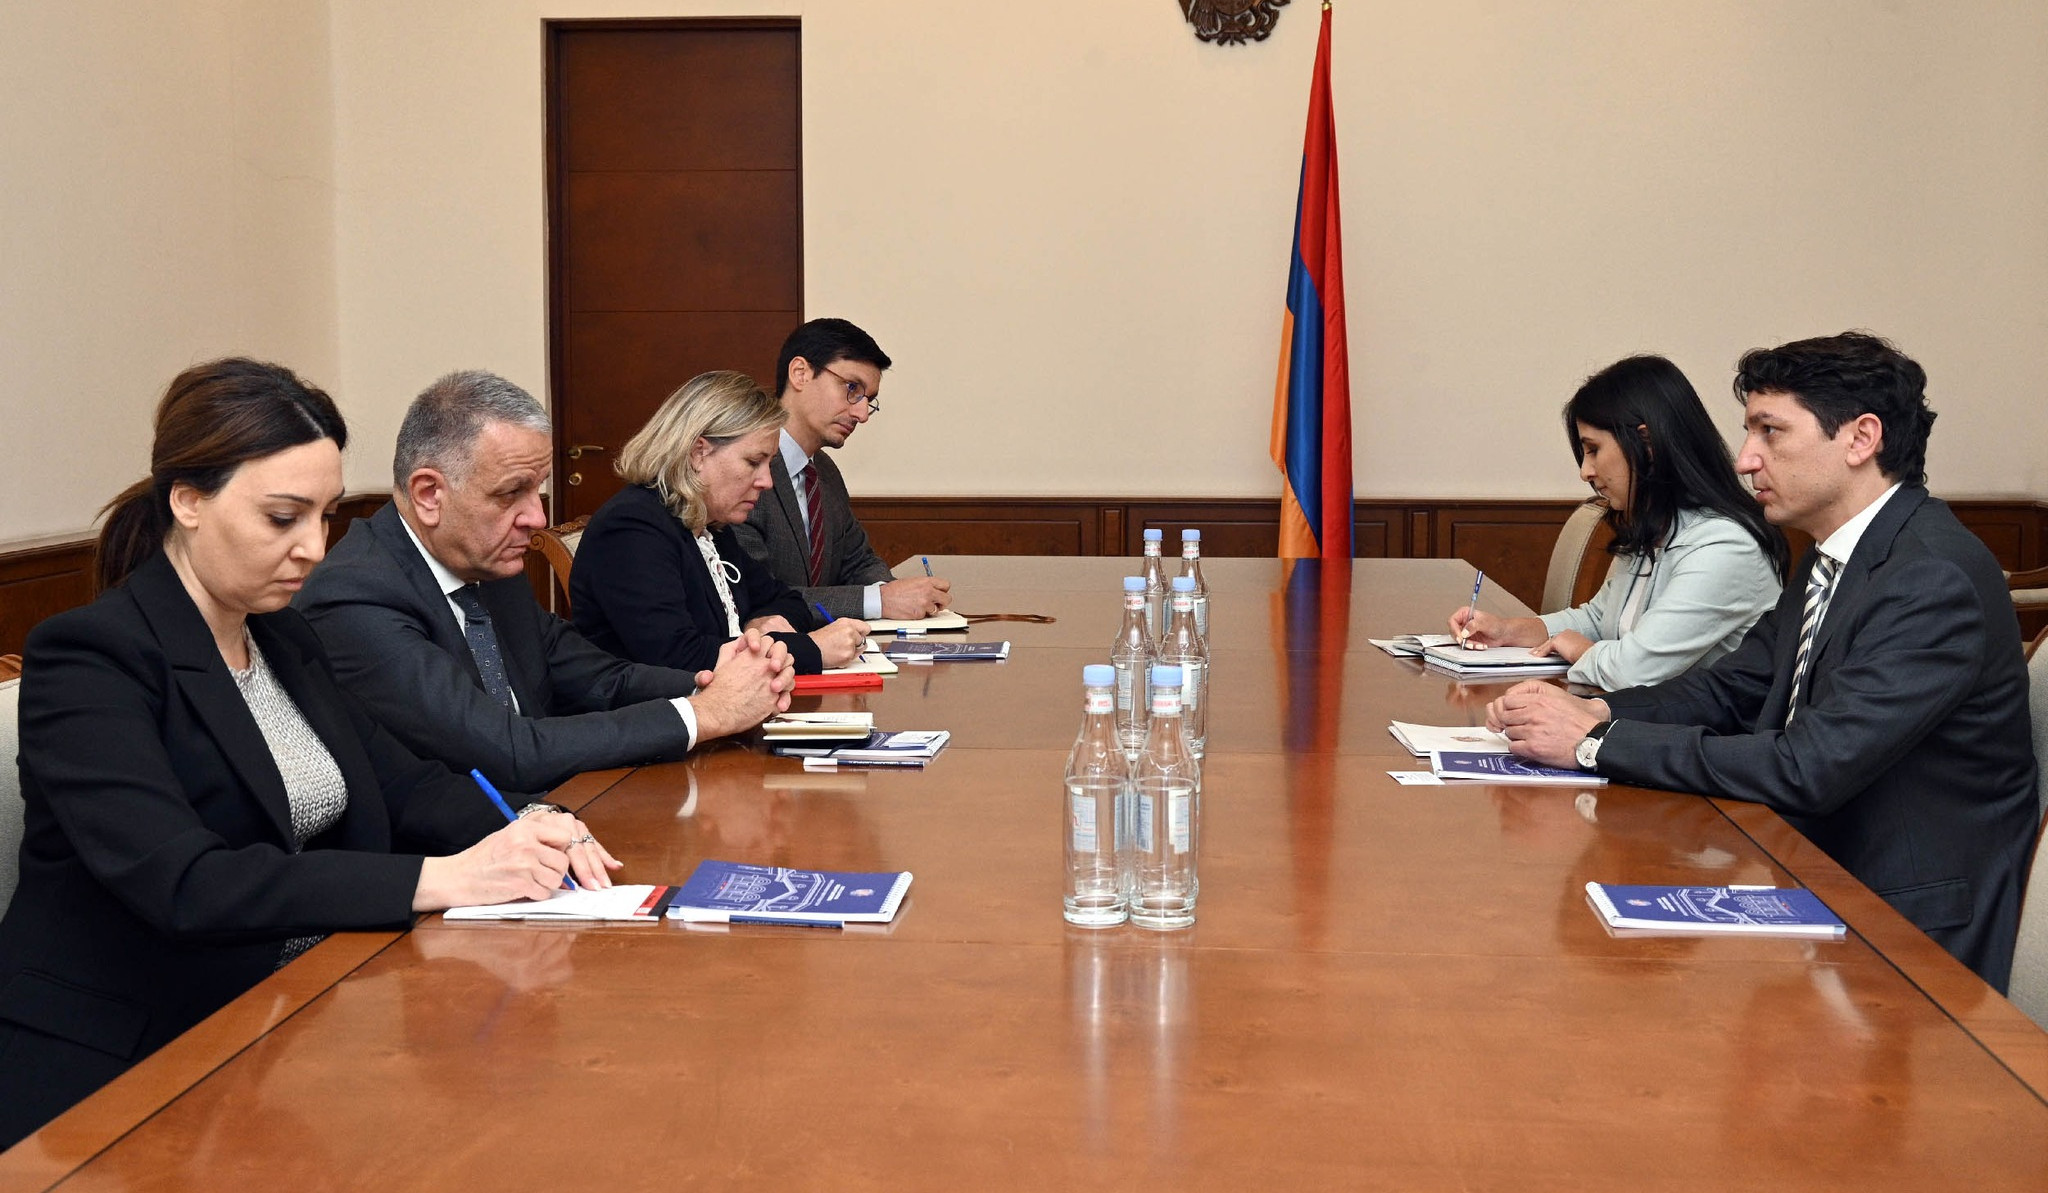 Ambassador Maragos reaffirmed commitment of EU to support plans of Armenian Government regarding displaced people of Nagorno-Karabakh